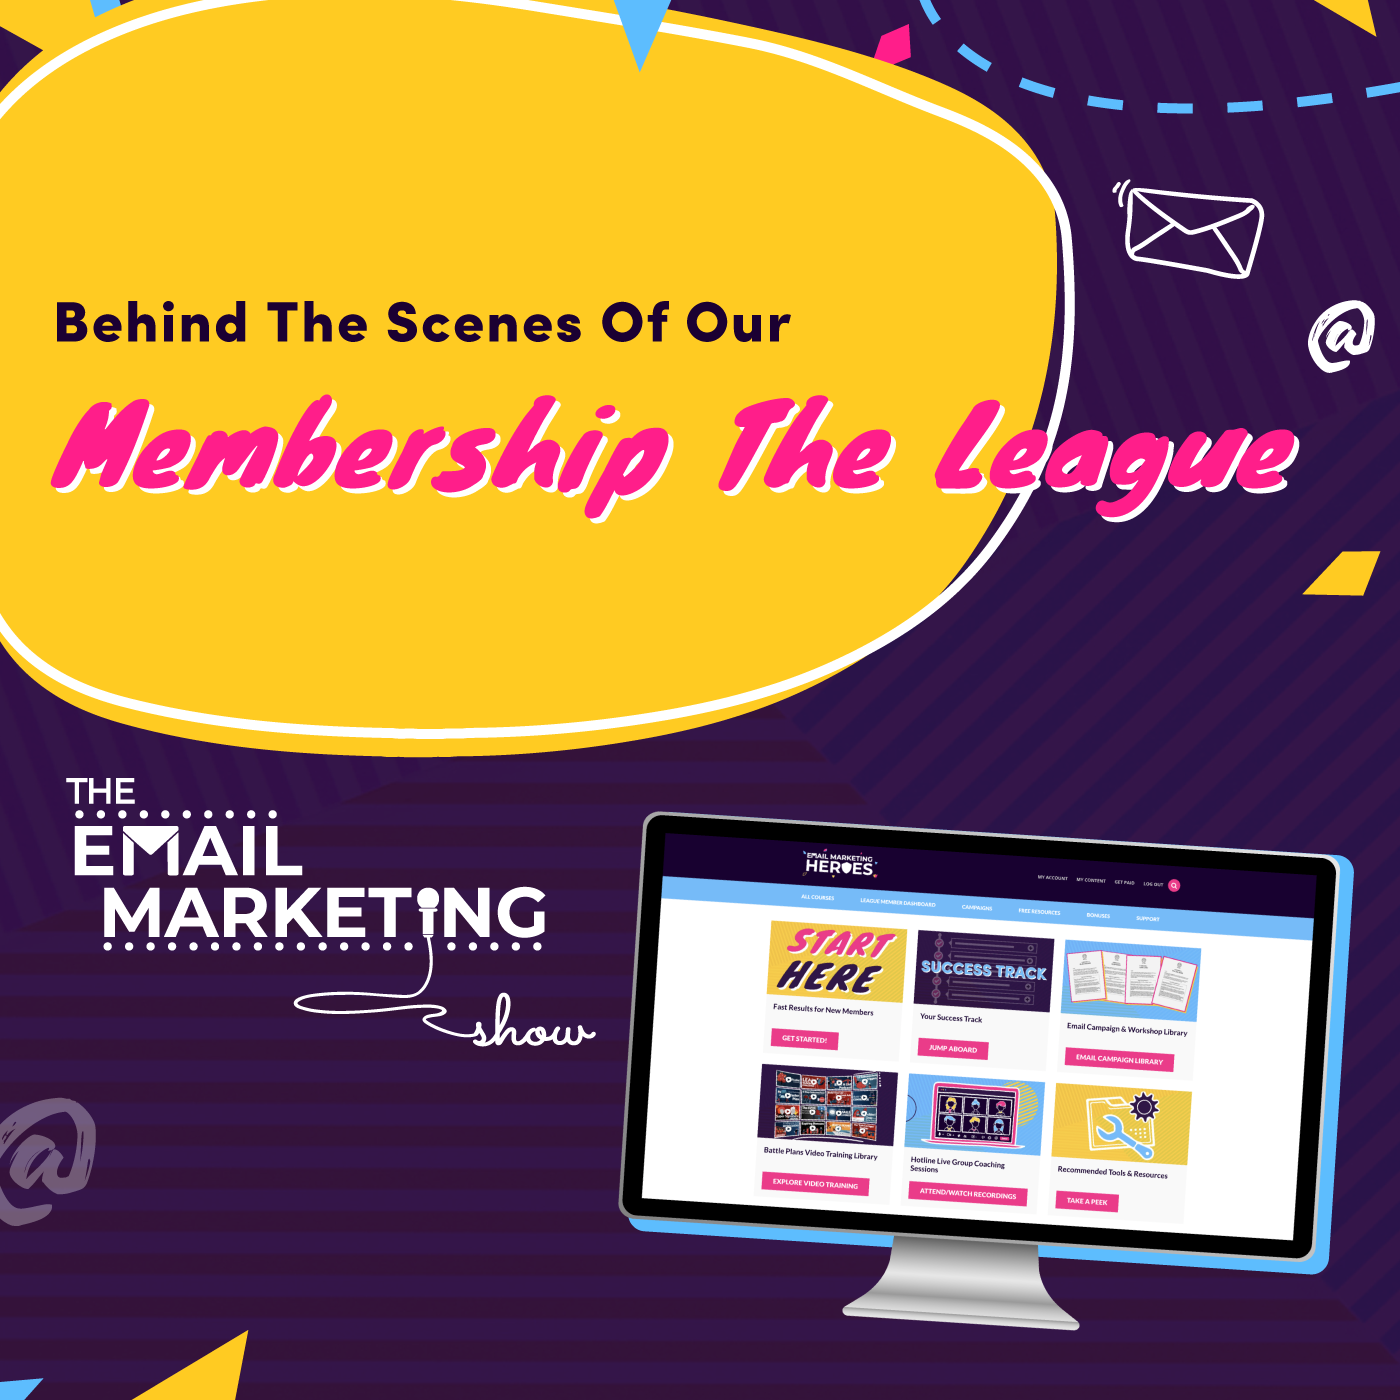 Everything You Need To Know About Our Membership The League (THE Behind The Scenes!)